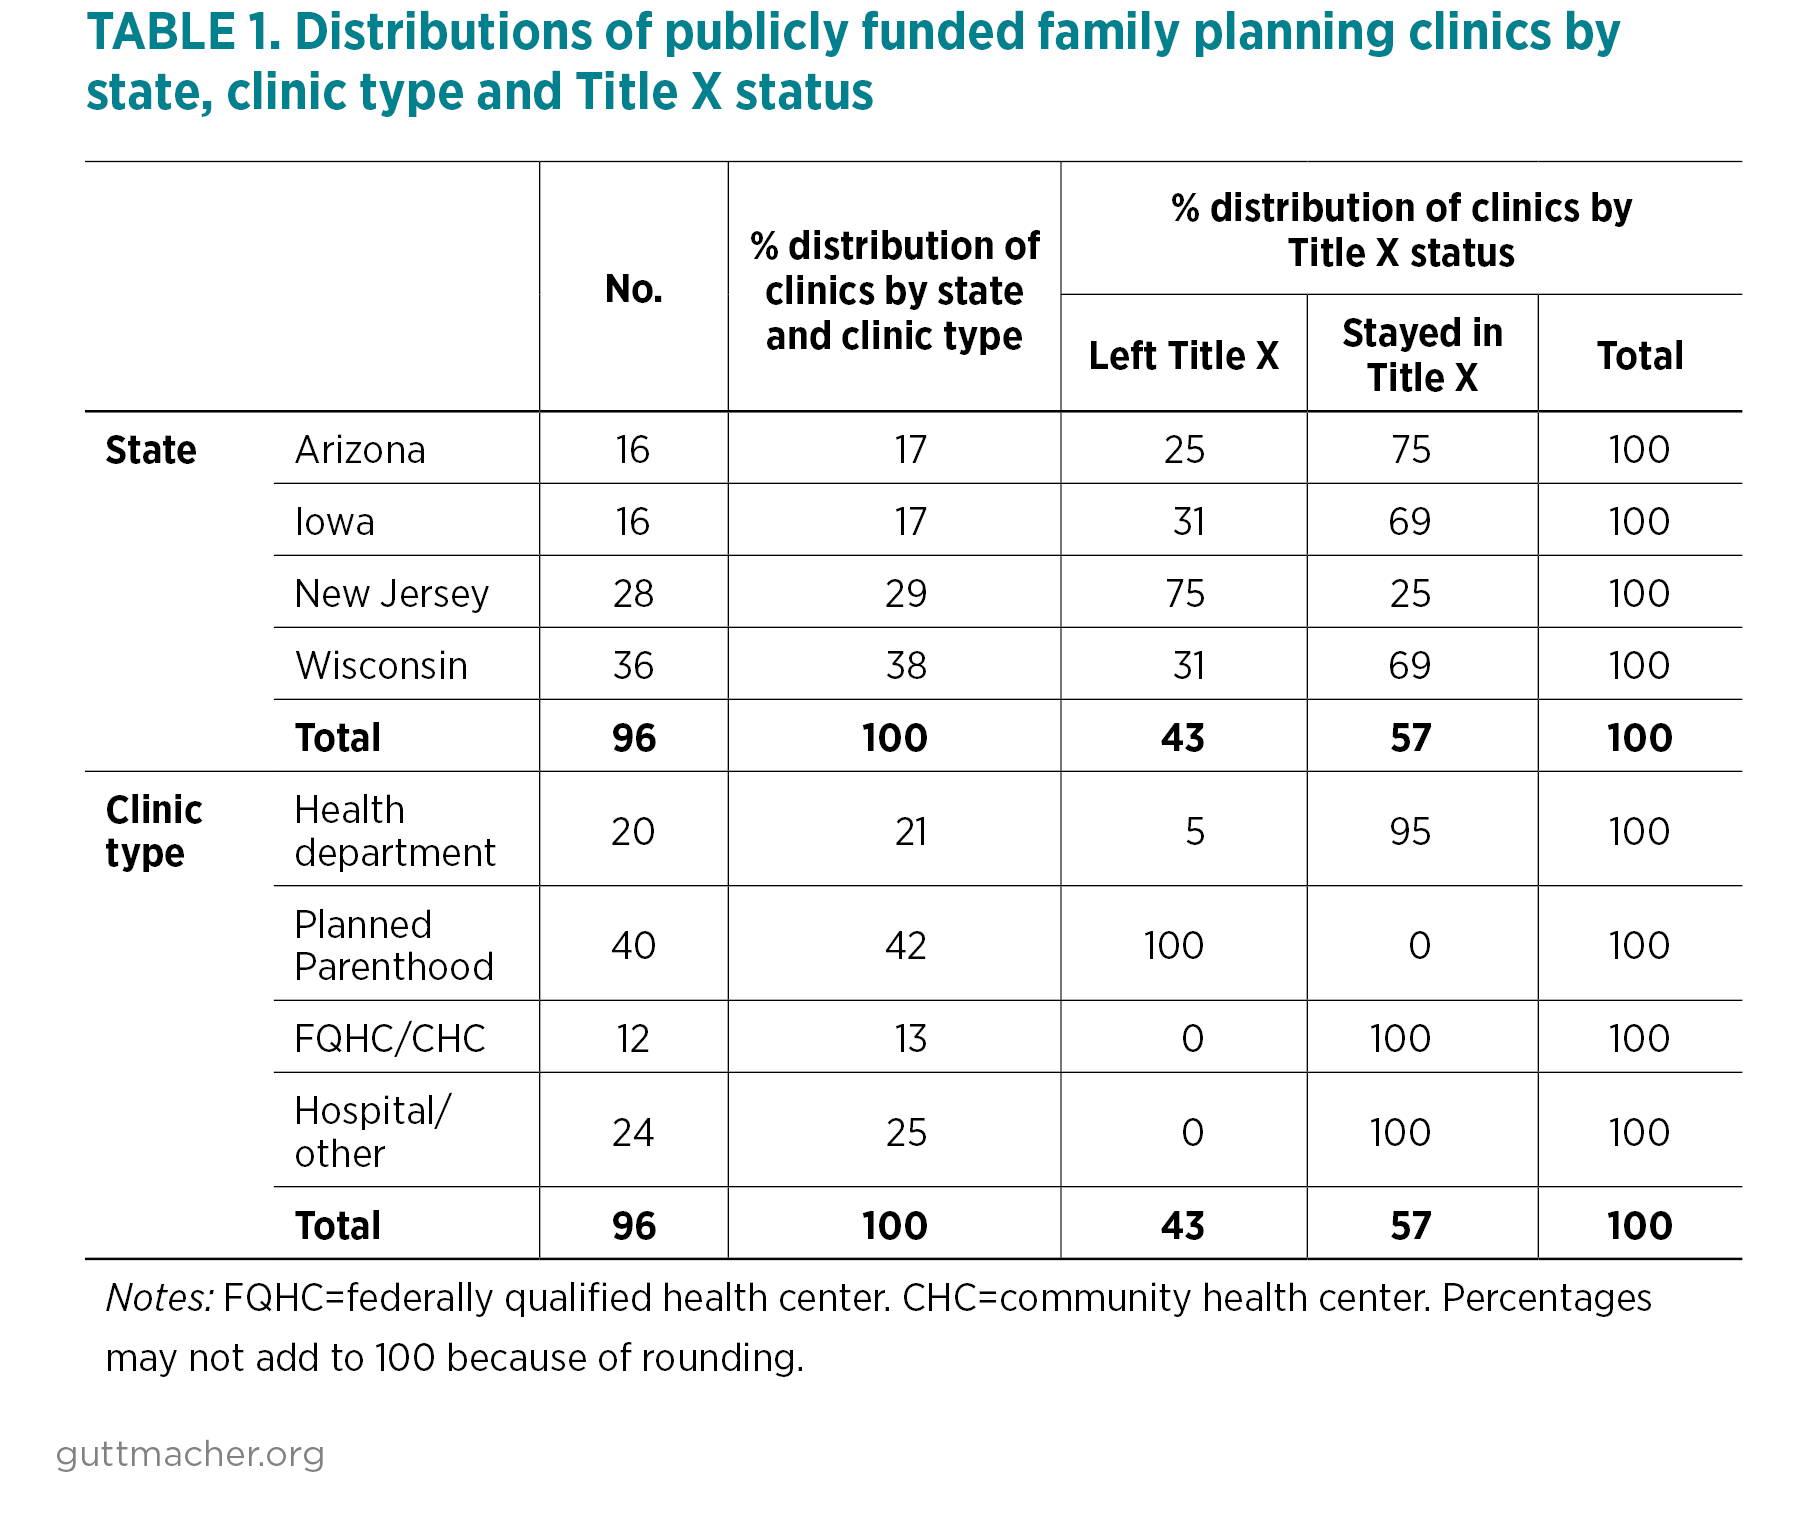 Table showing Distributions of publicly funded family planning clinics by state, clinic type and Title X status